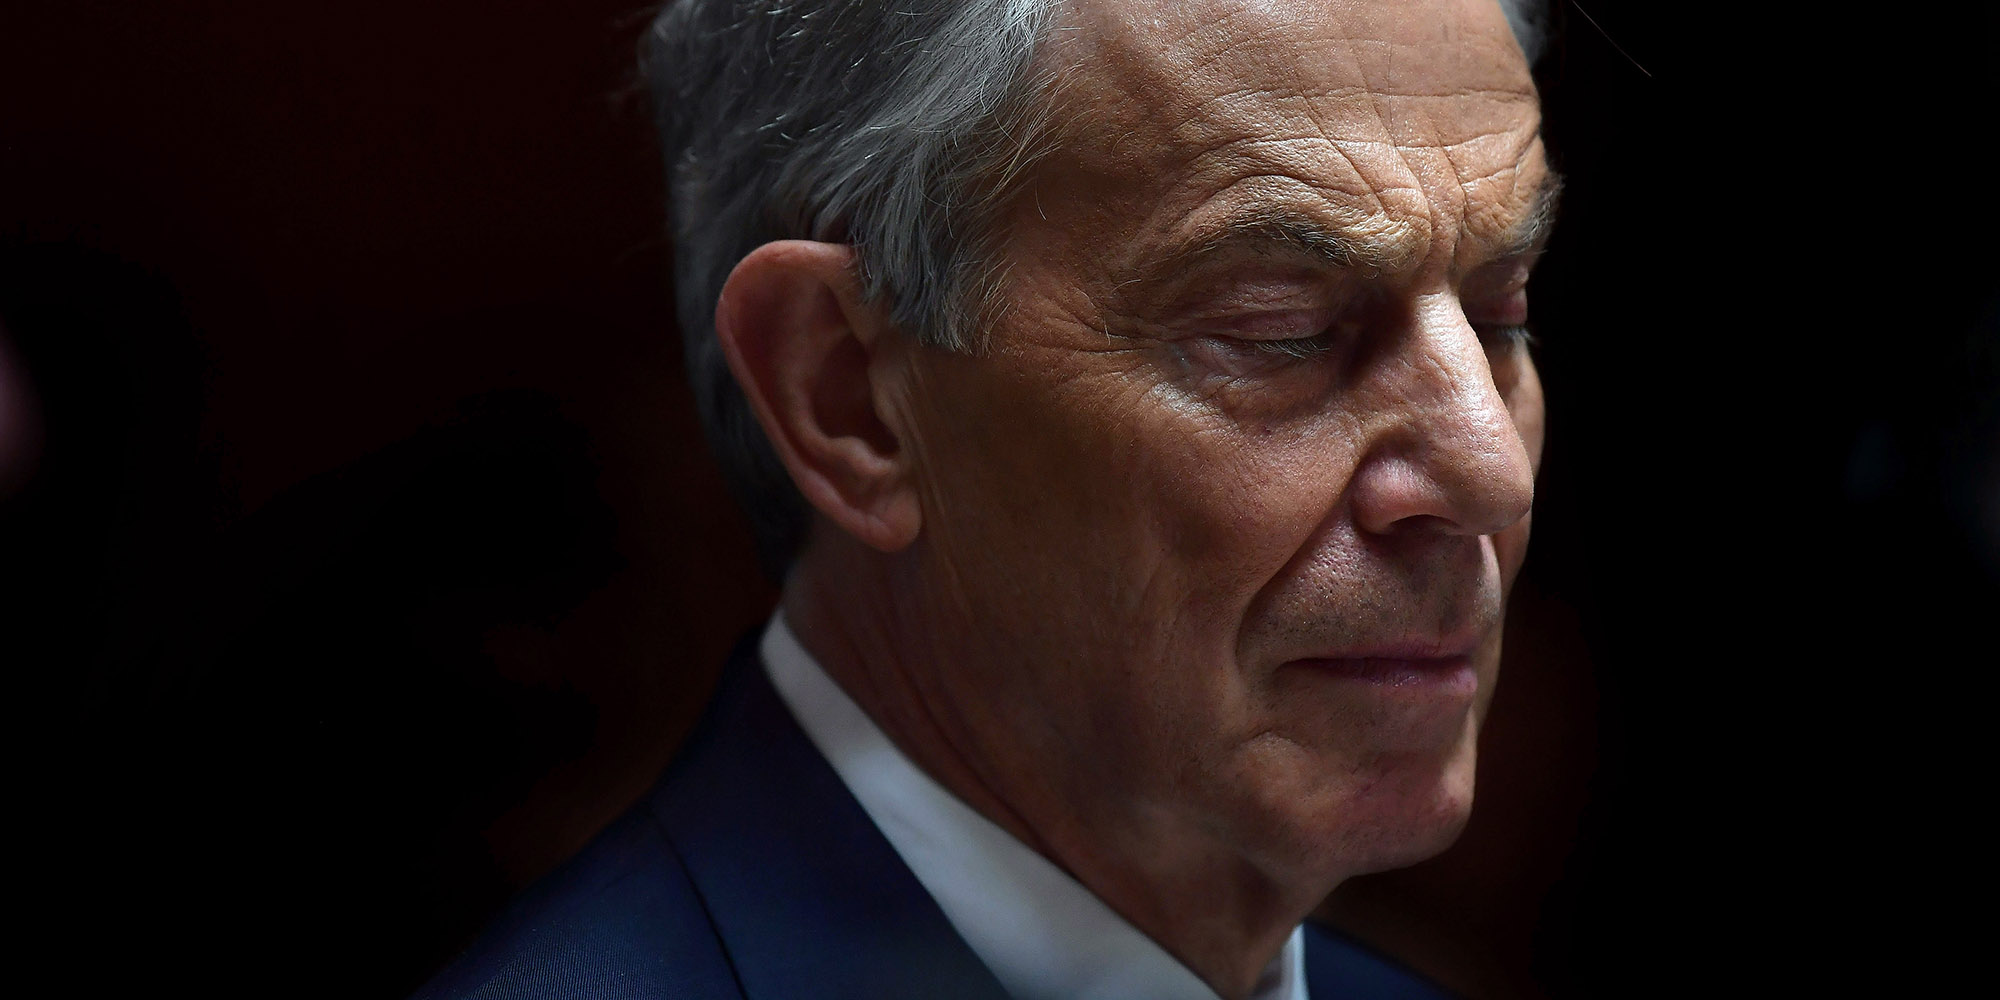 WICKLOW, IRELAND - MAY 12: Former British Prime Minister Tony Blair pauses as he addresses the media after attending the European People's Party (EPP) Group Bureau meeting at Druids Glen on May 12, 2017 in Wicklow, Ireland. Brexit and negotiating objectives will top the agenda at the meeting alongside the unique circumstances regarding the hard border issue between northern and southern Ireland, the only physical border between the United Kingdom and Europe. Mr Blair has signaled a return to politics in light of the Brexit vote. The meeting also features European Commission Brexit chief negotiator Michel Barnier. (Photo by Charles McQuillan/Getty Images)